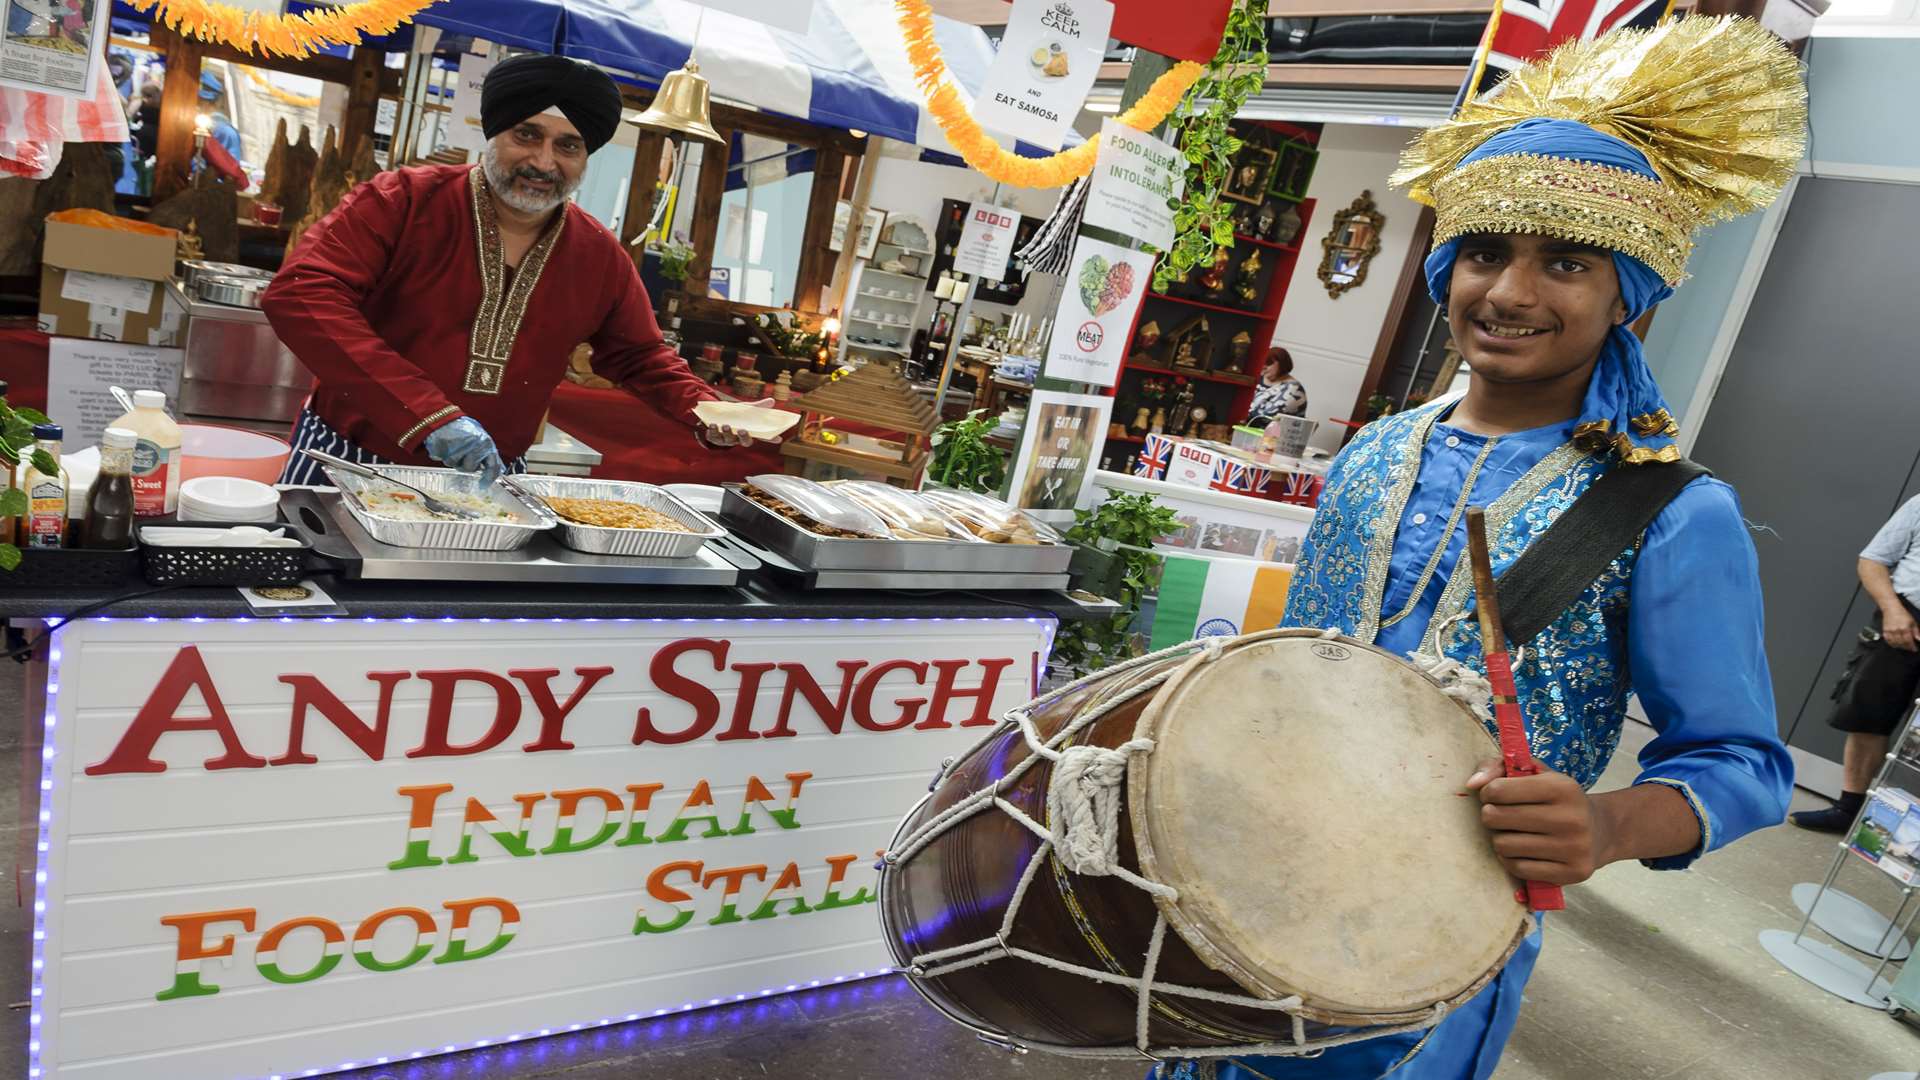 Andy Singh on his stall with drummer Suraj Sanger helping bring in the business